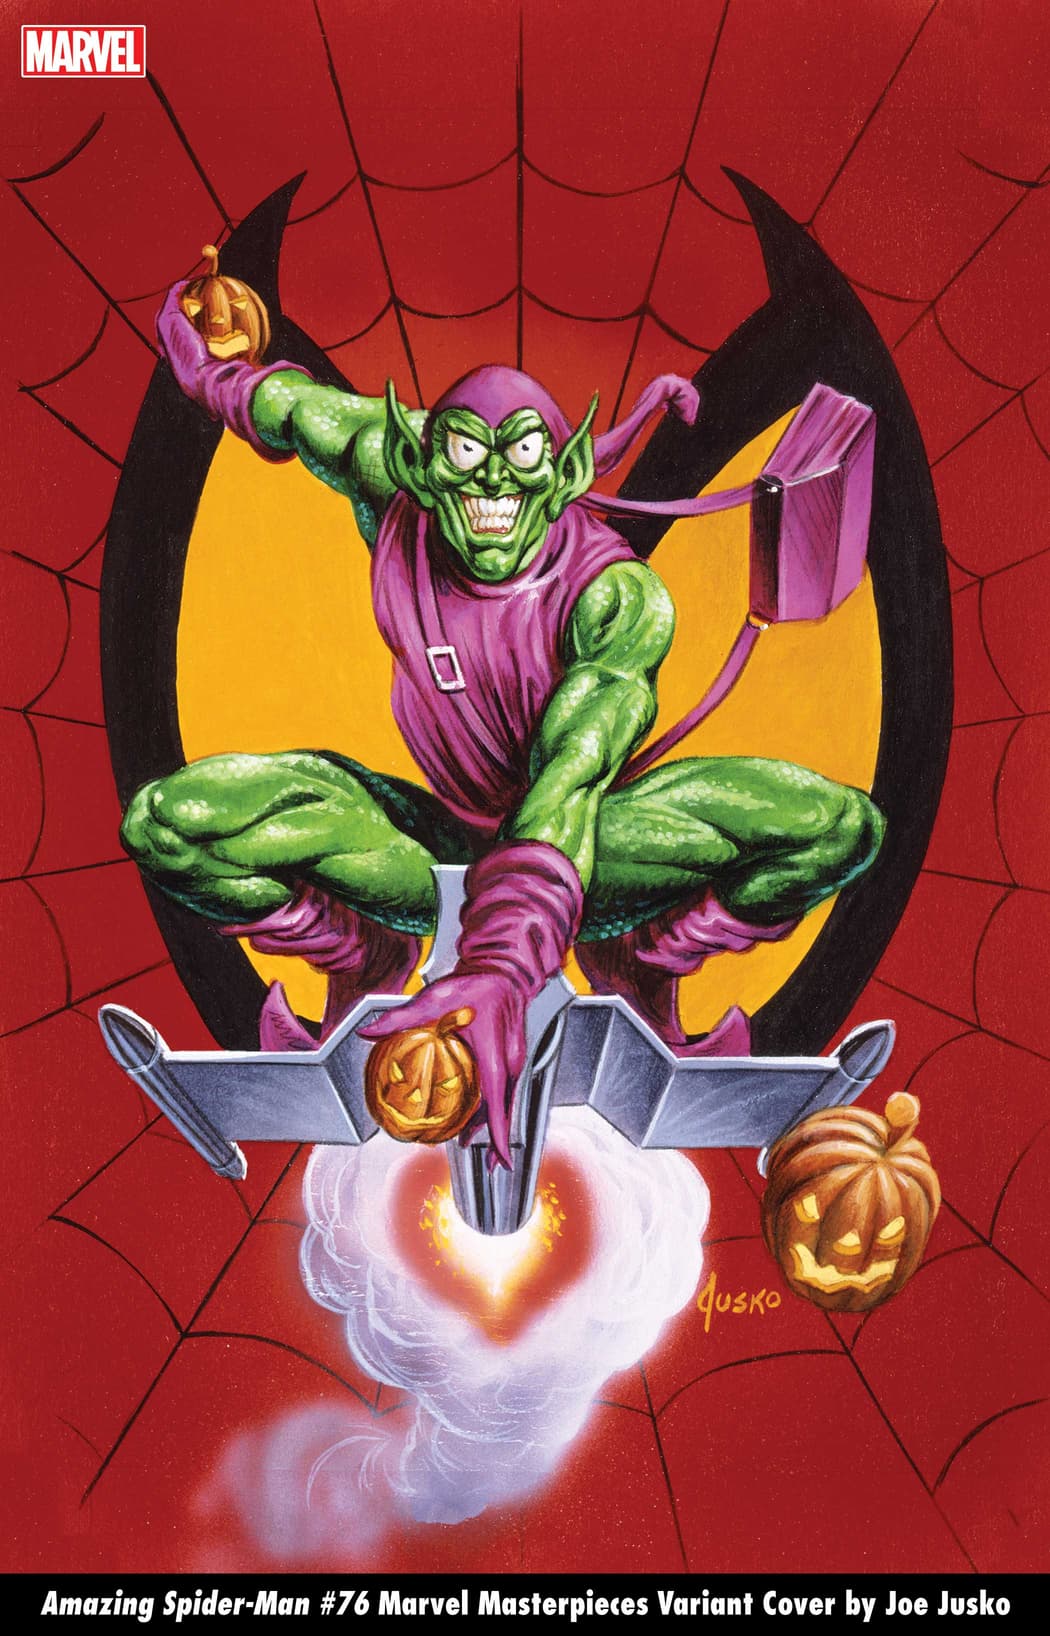 AMAZING SPIDER-MAN #76 MARVEL MASTERPIECES VARIANT COVER by JOE JUSKO